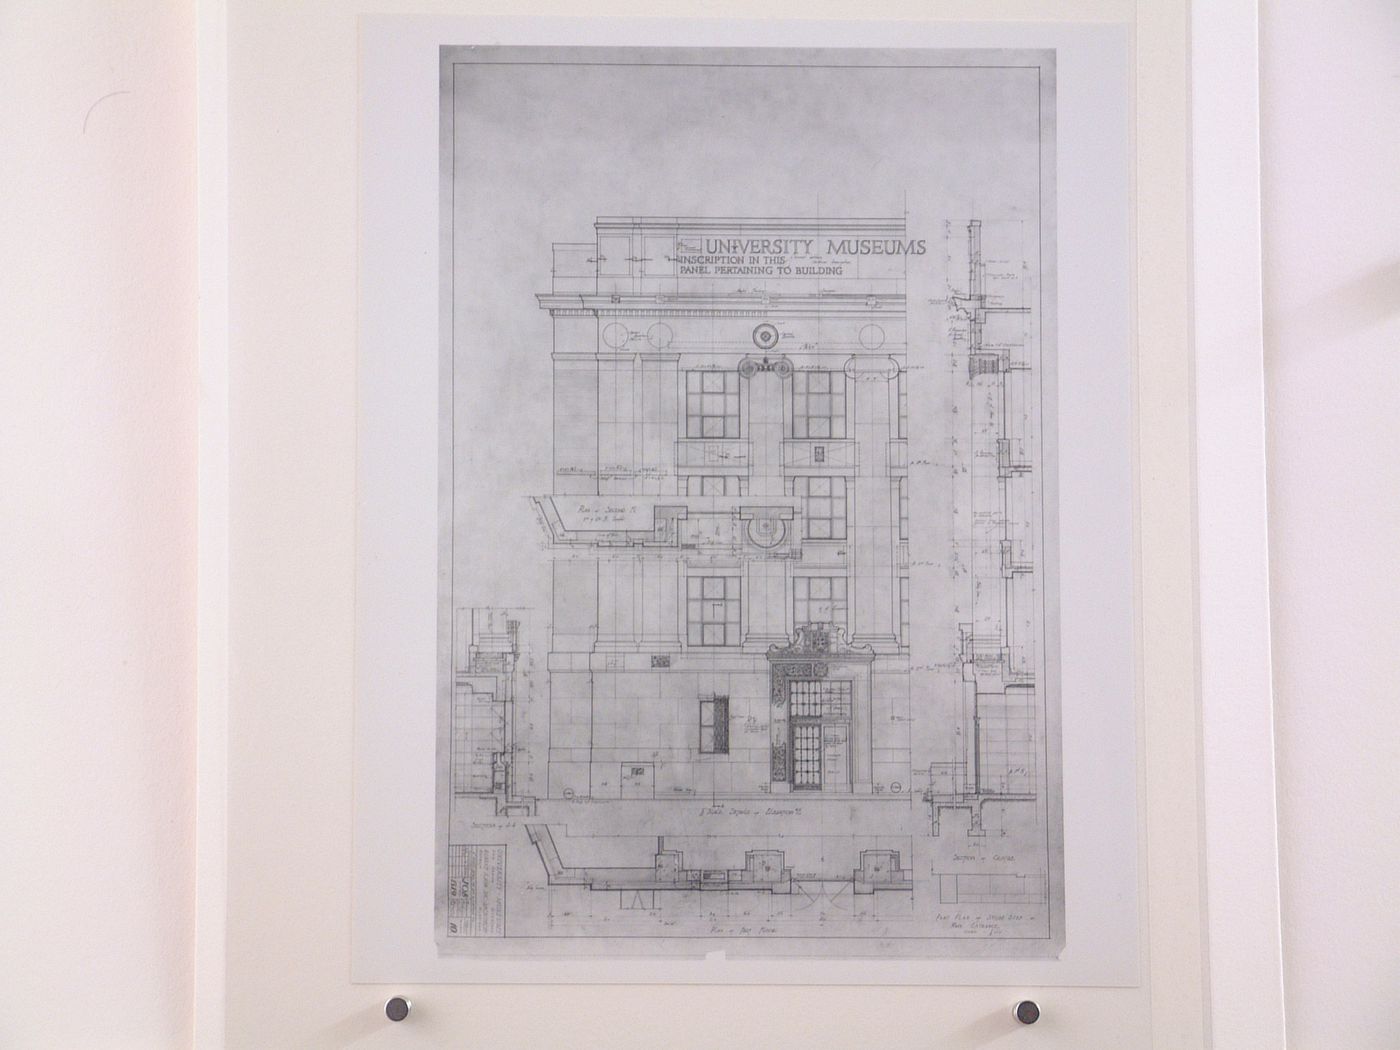 Photograph of an elevation, plans and sections for the Alexander G. Ruthven Museums Building, North University Avenue, University of Michigan, Ann Arbor, Michigan